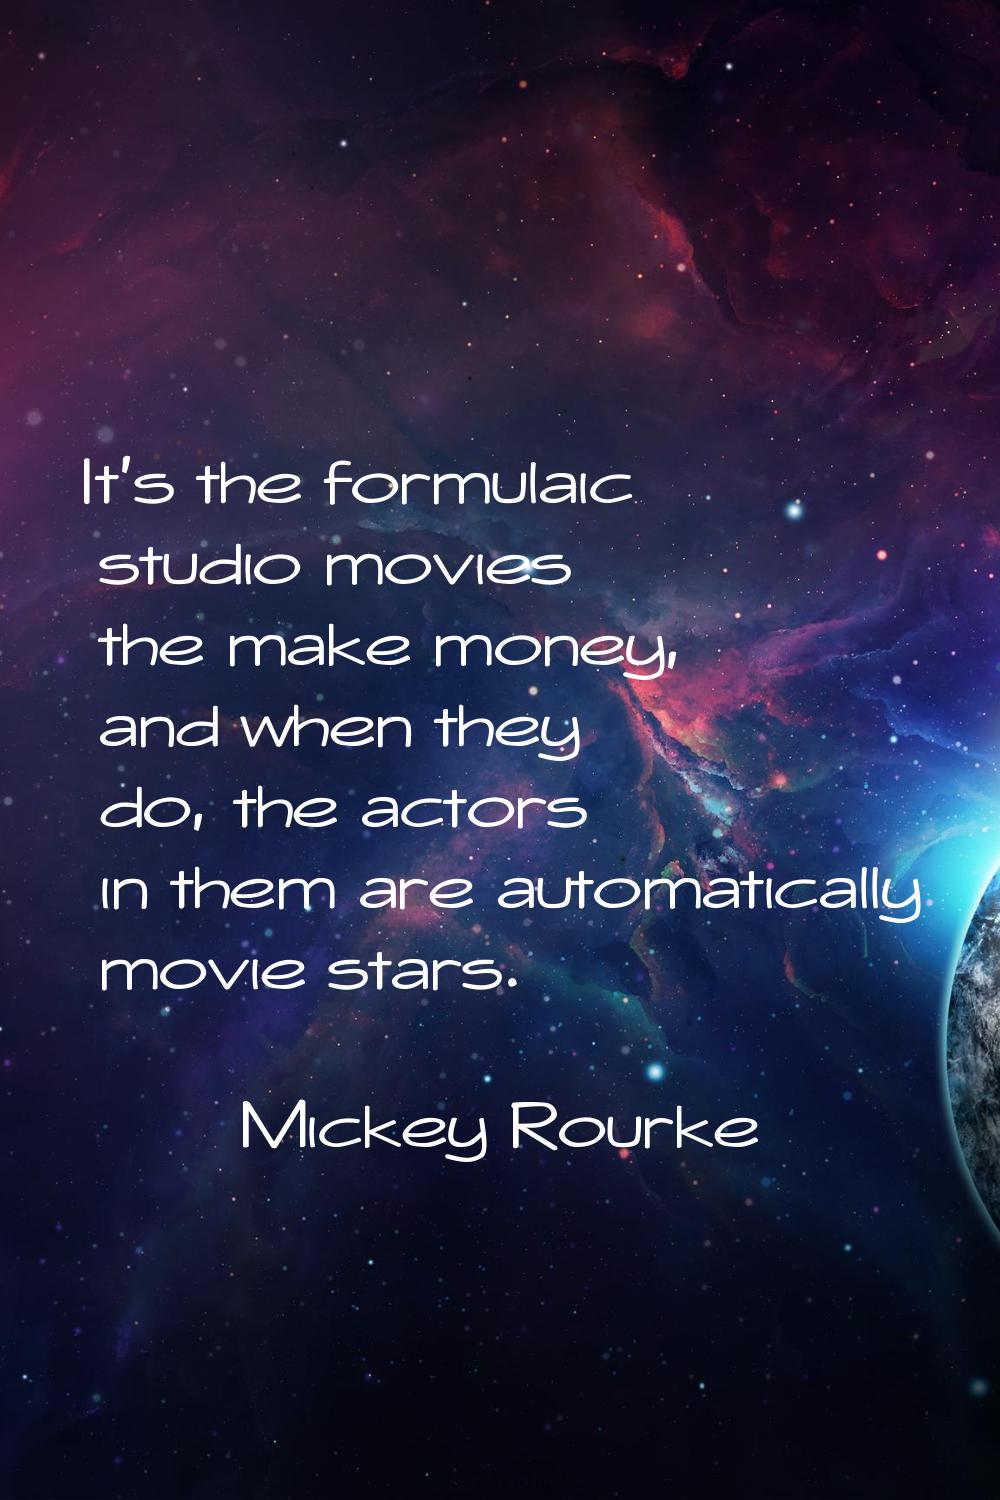 It's the formulaic studio movies the make money, and when they do, the actors in them are automatic